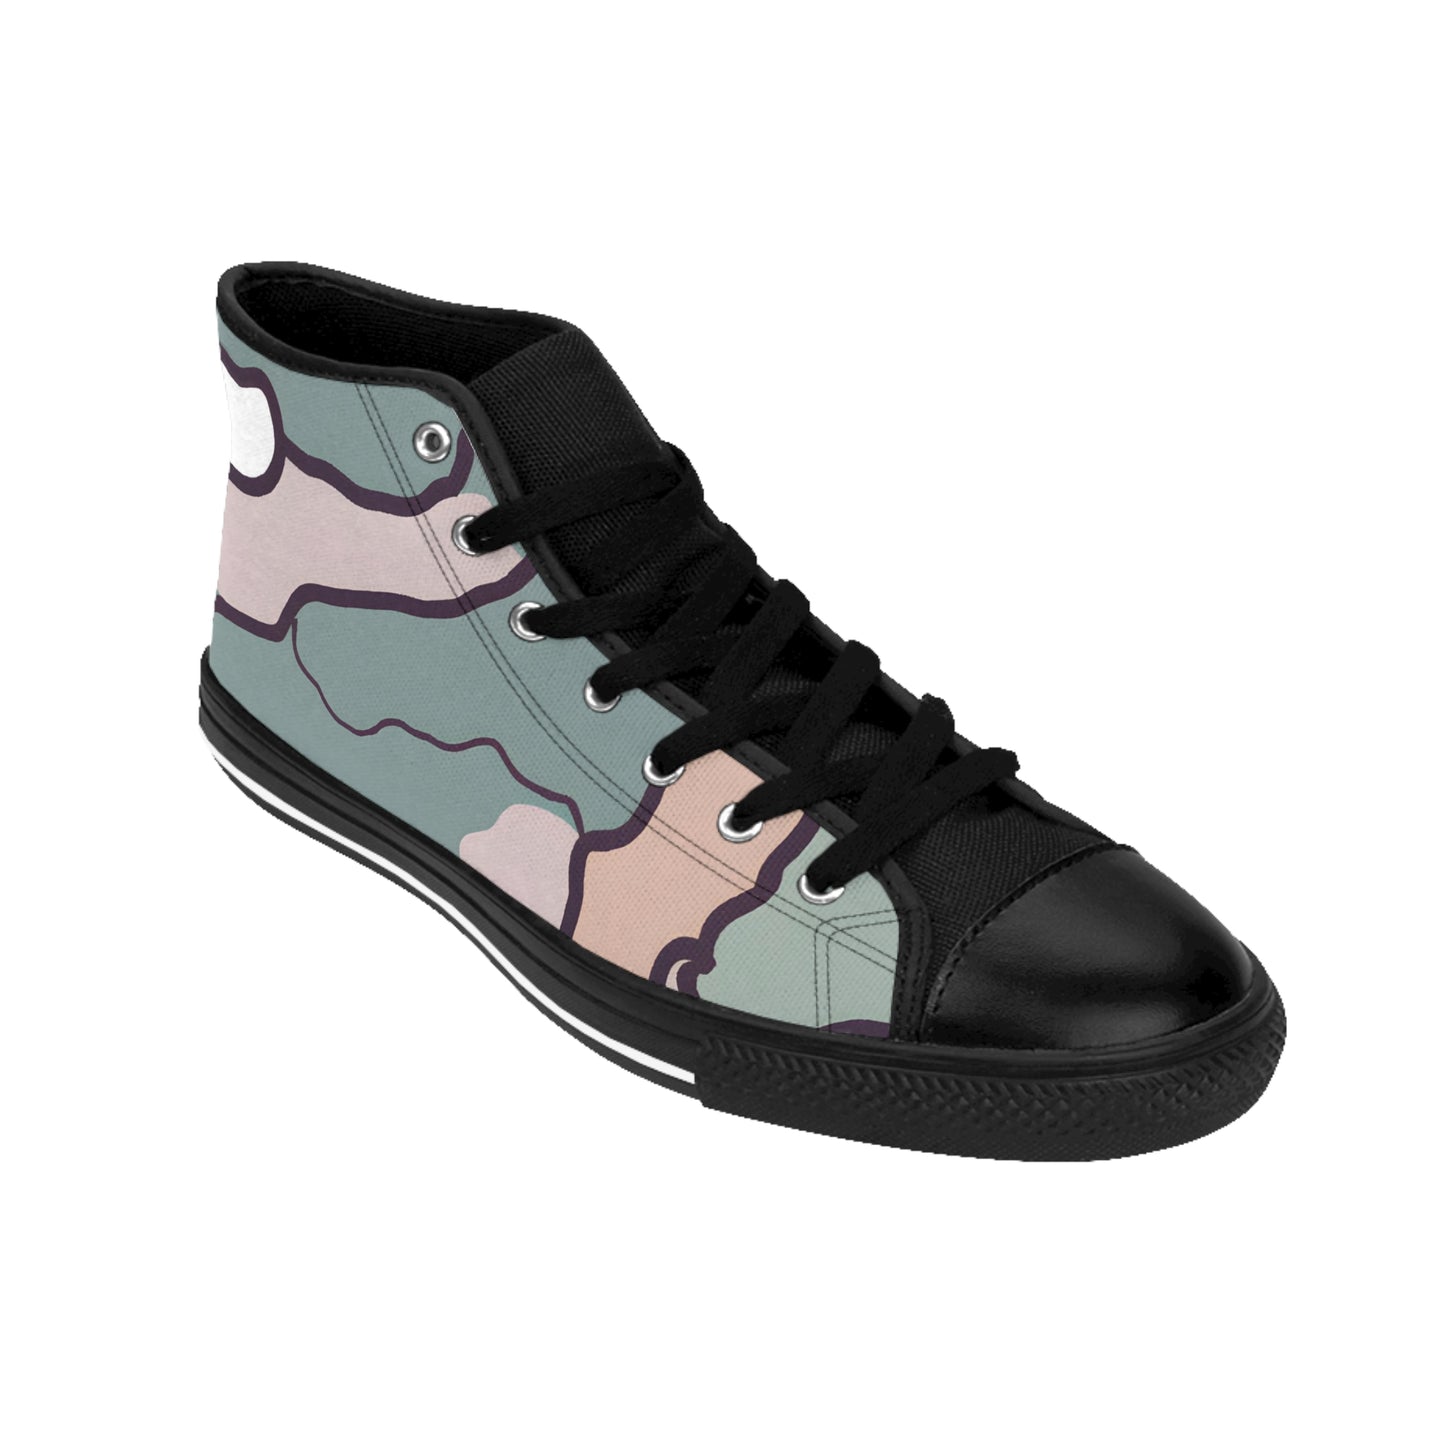 Mitri Charlotte - Women's Classic HIgh-Top Sneakers